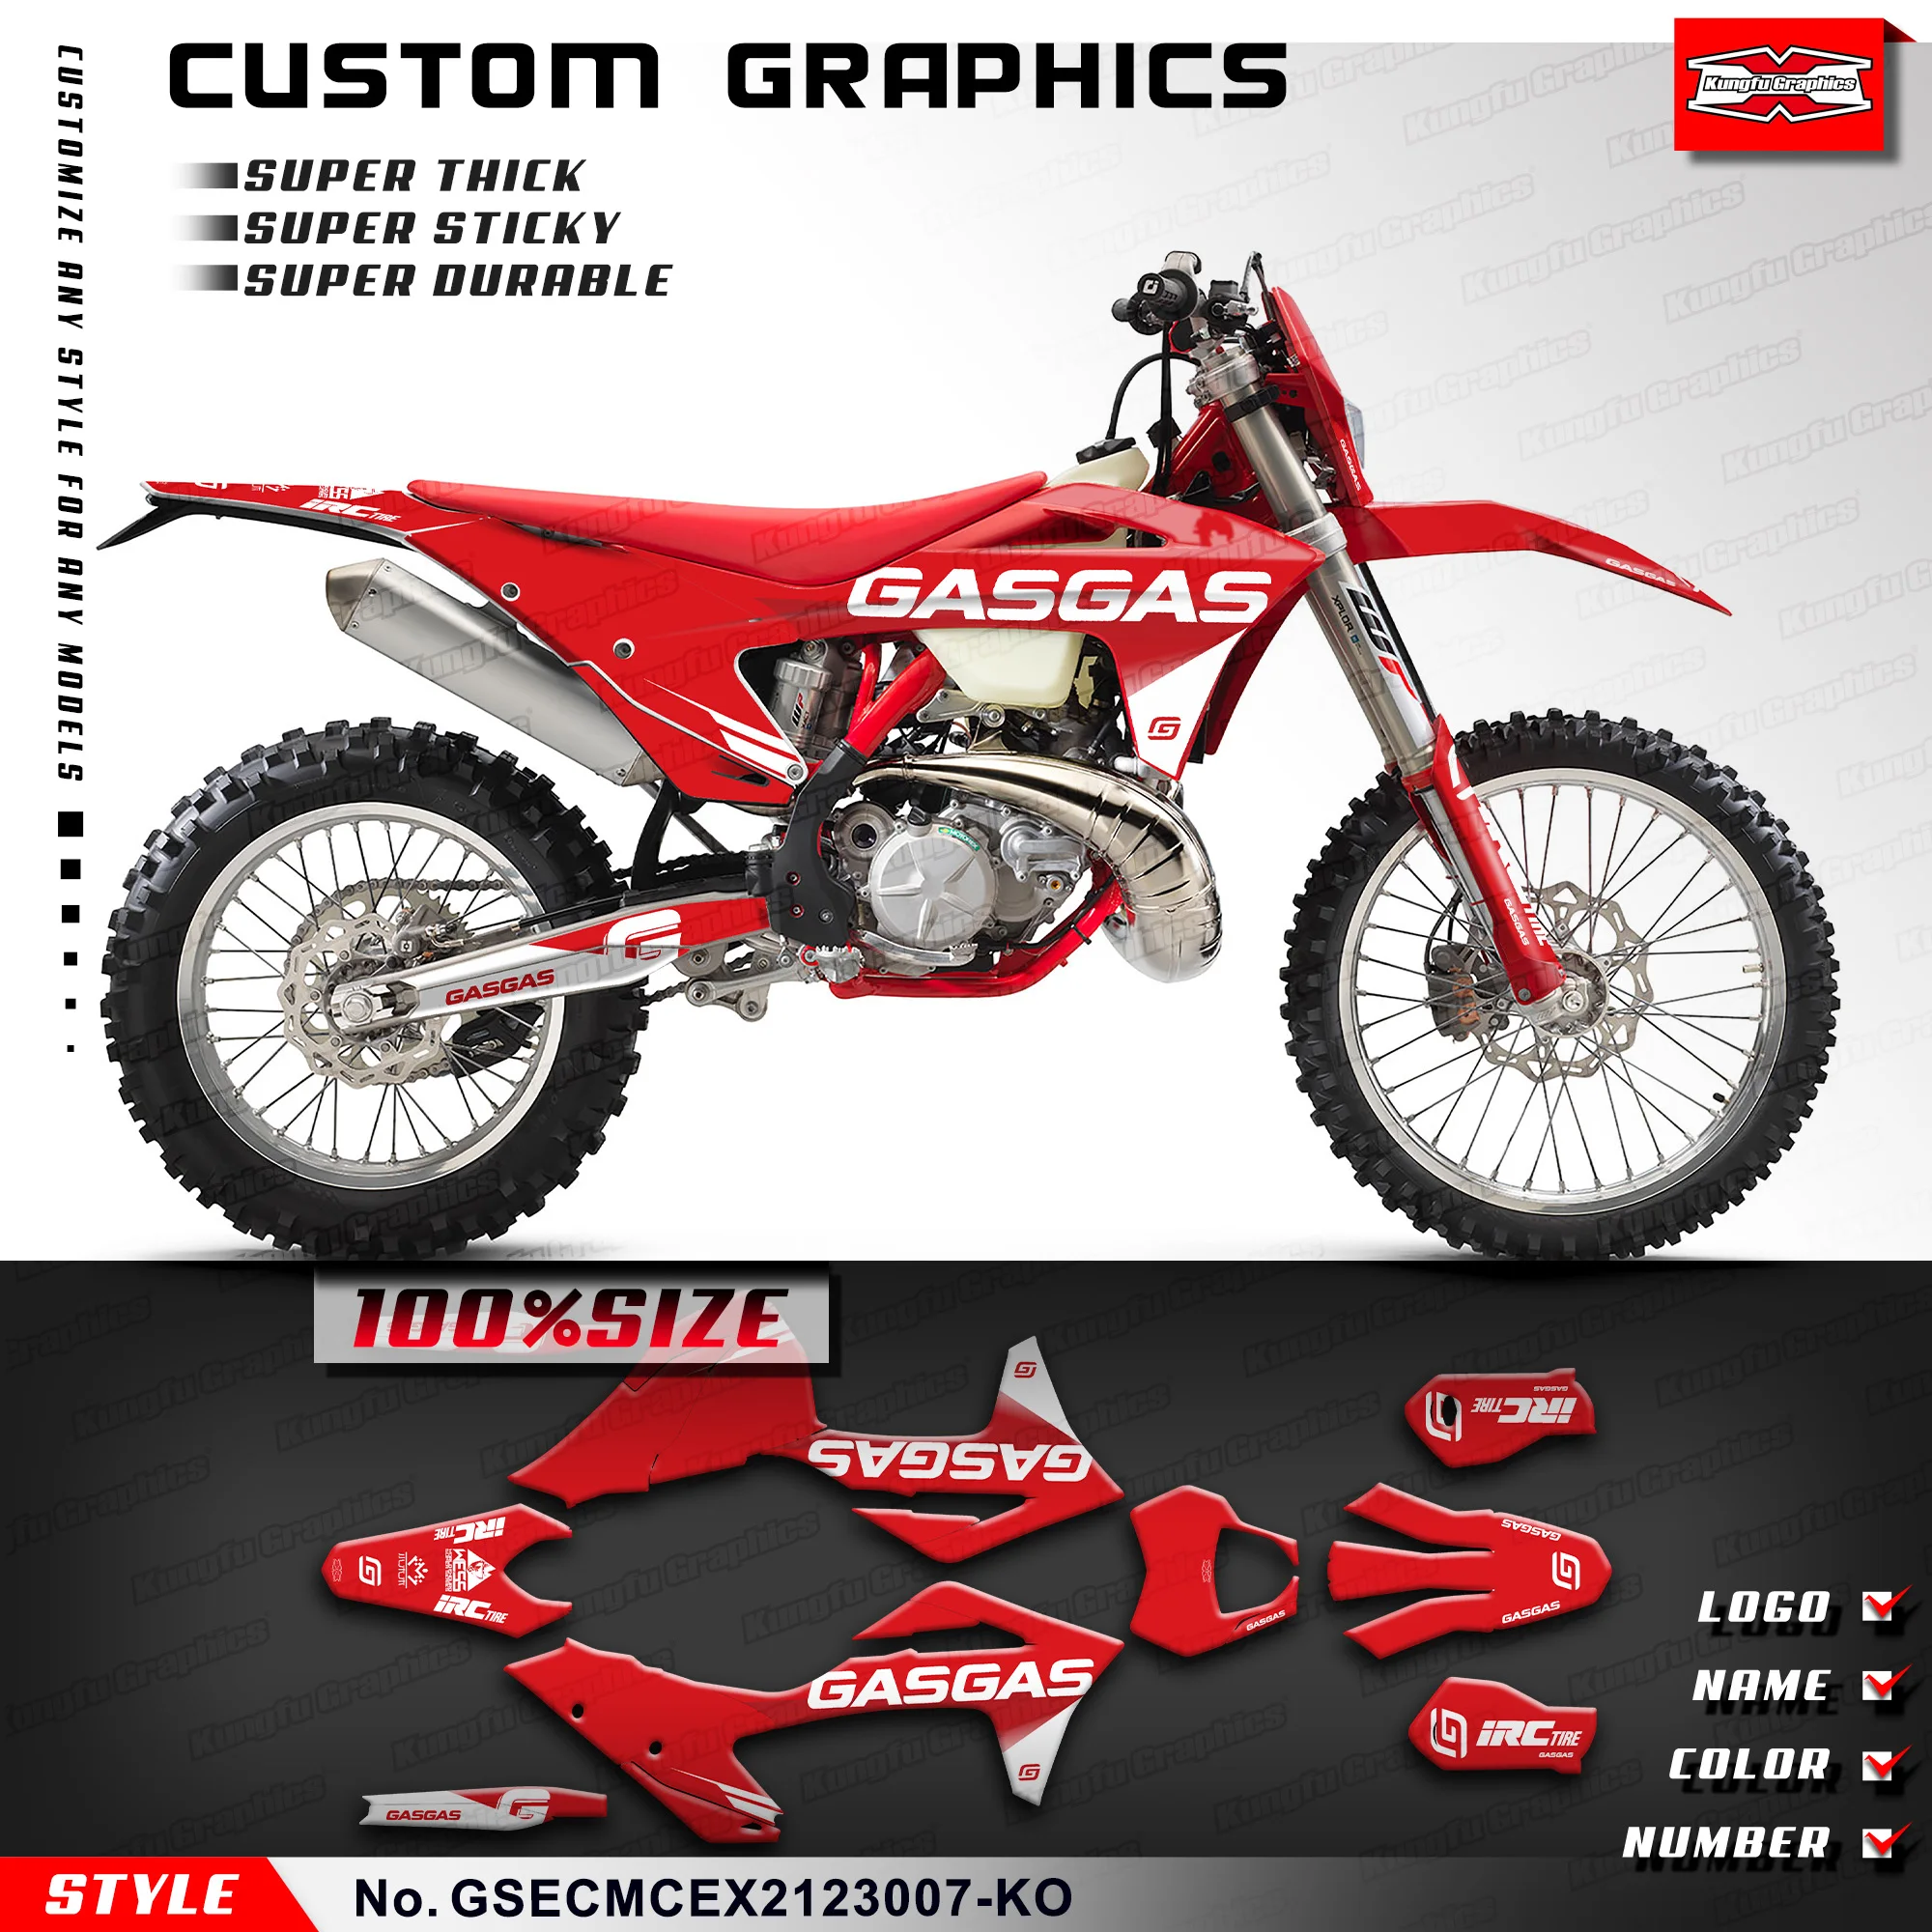 KUNGFU GRAPHICS Waterproof Decals Stickers for Gas Gas EC250 EC300 EC 250F 300F MC 125F 250F 450F EX300 EX250 2021 2022 2023 kungfu graphics custom decals waterproof stickers kit for sur ron ultra bee surron grey